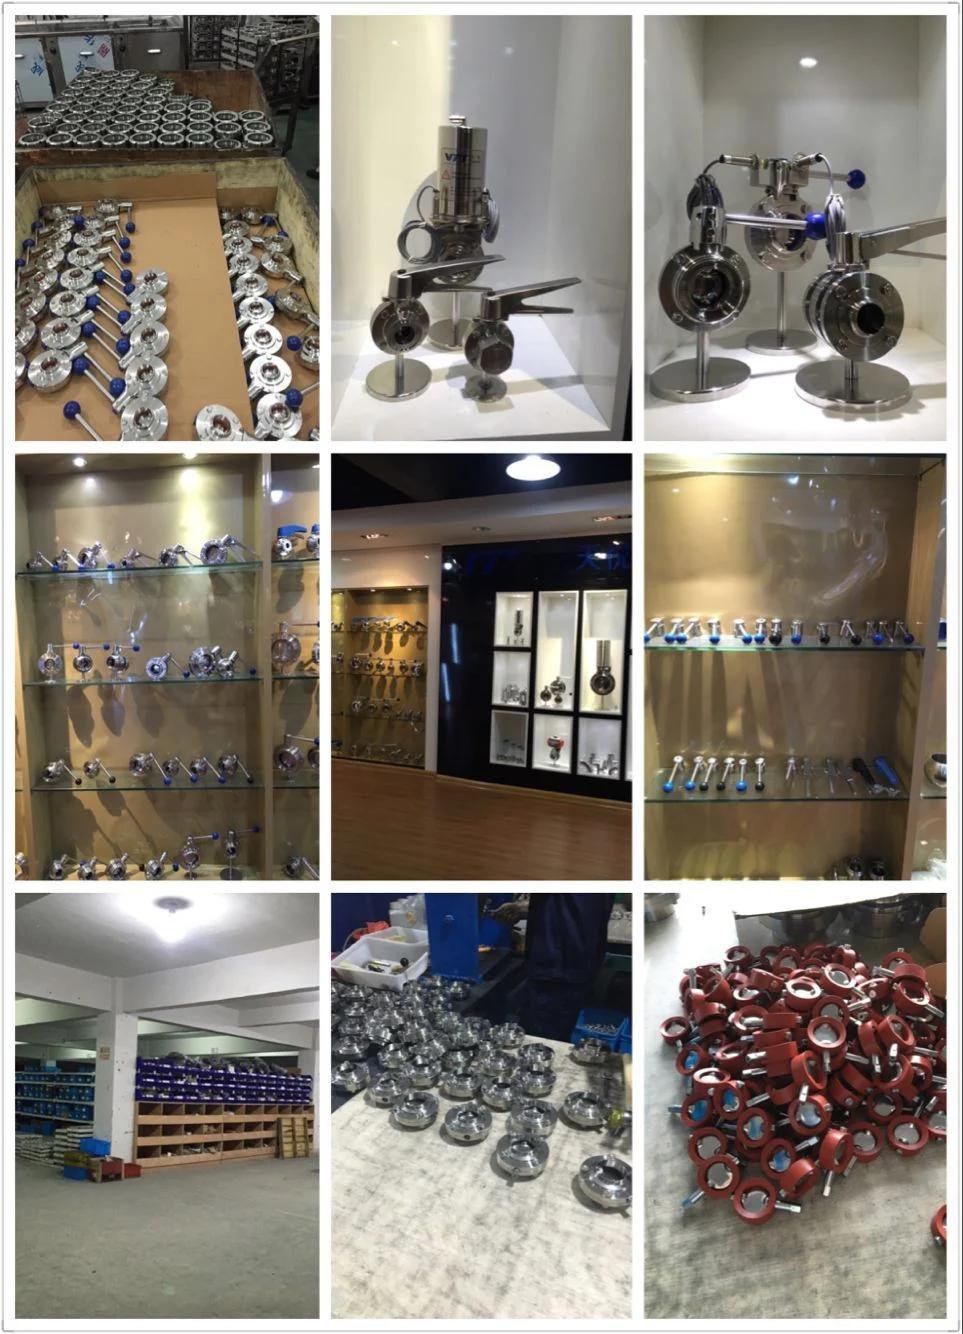 Sanitary Stainless Steel Pipe Fitting Reducers